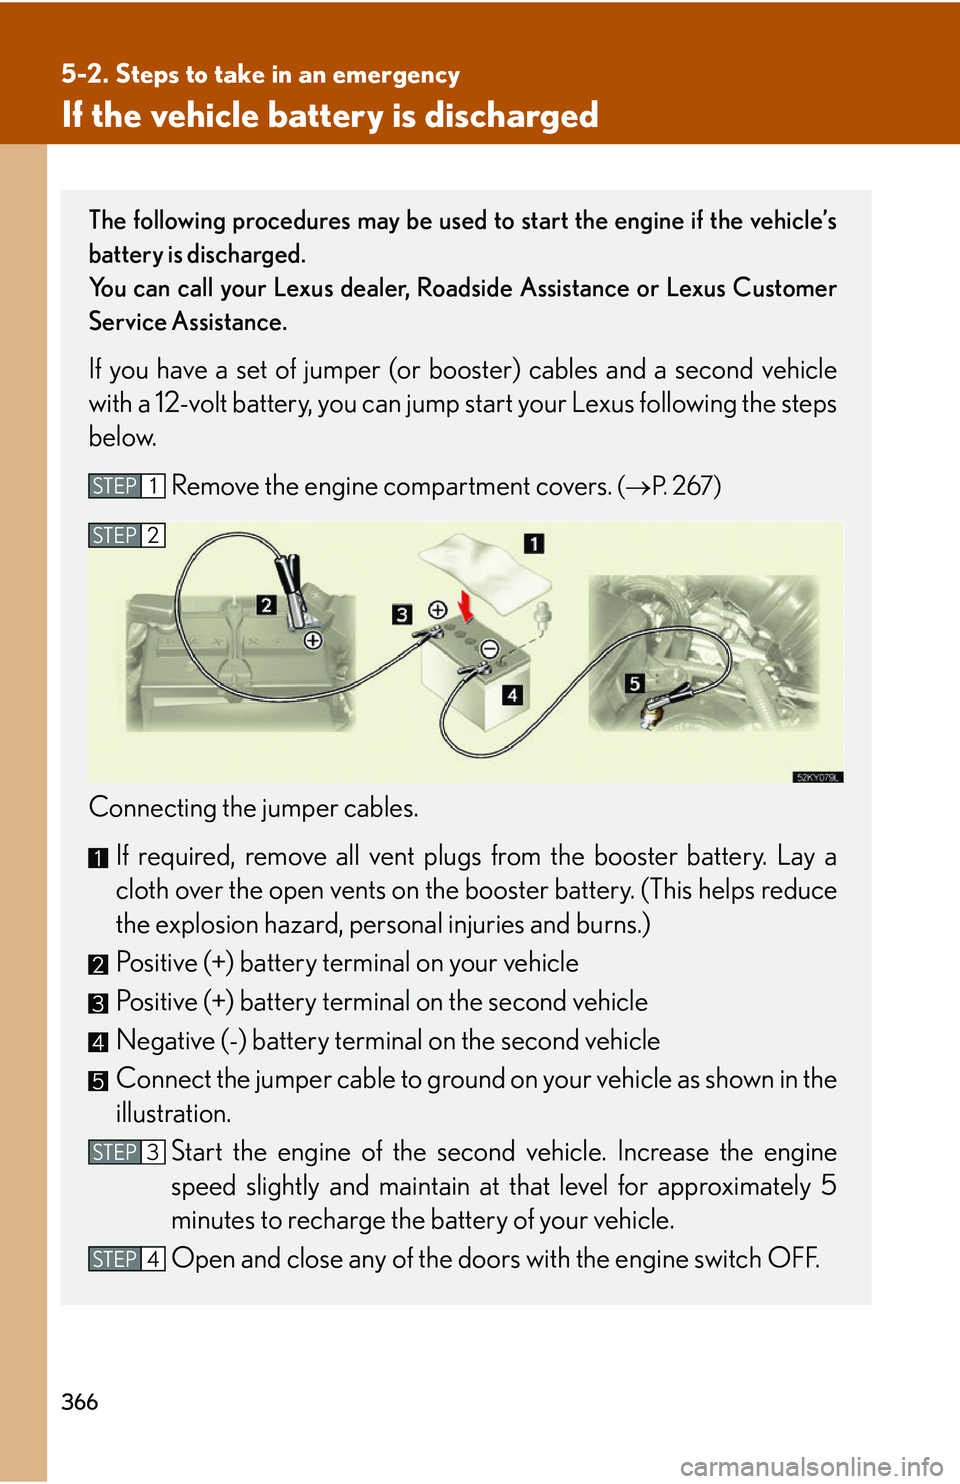 Lexus IS350 2006  Scheduled Maintenance Guide / LEXUS 2006 IS350/250 FROM MAY 2006 PROD. OWNERS MANUAL (OM53619U) 366
5-2. Steps to take in an emergency
If the vehicle battery is discharged
The following procedures may be used to start the engine if the vehicle’s
battery is discharged.
You can call your Lexus d